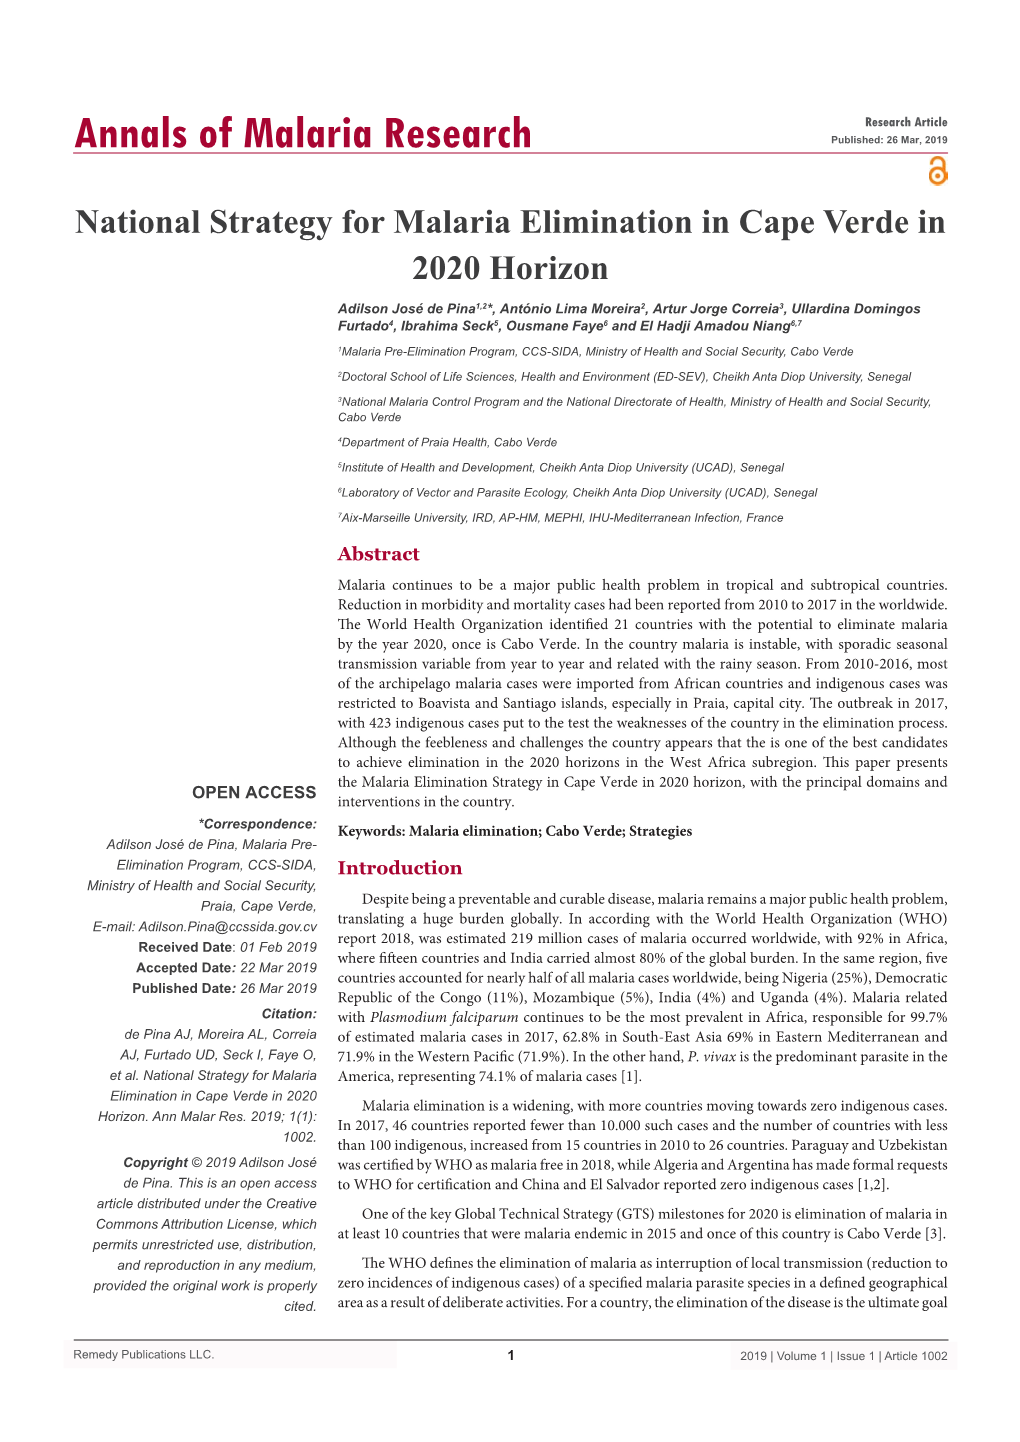 National Strategy for Malaria Elimination in Cape Verde in 2020 Horizon